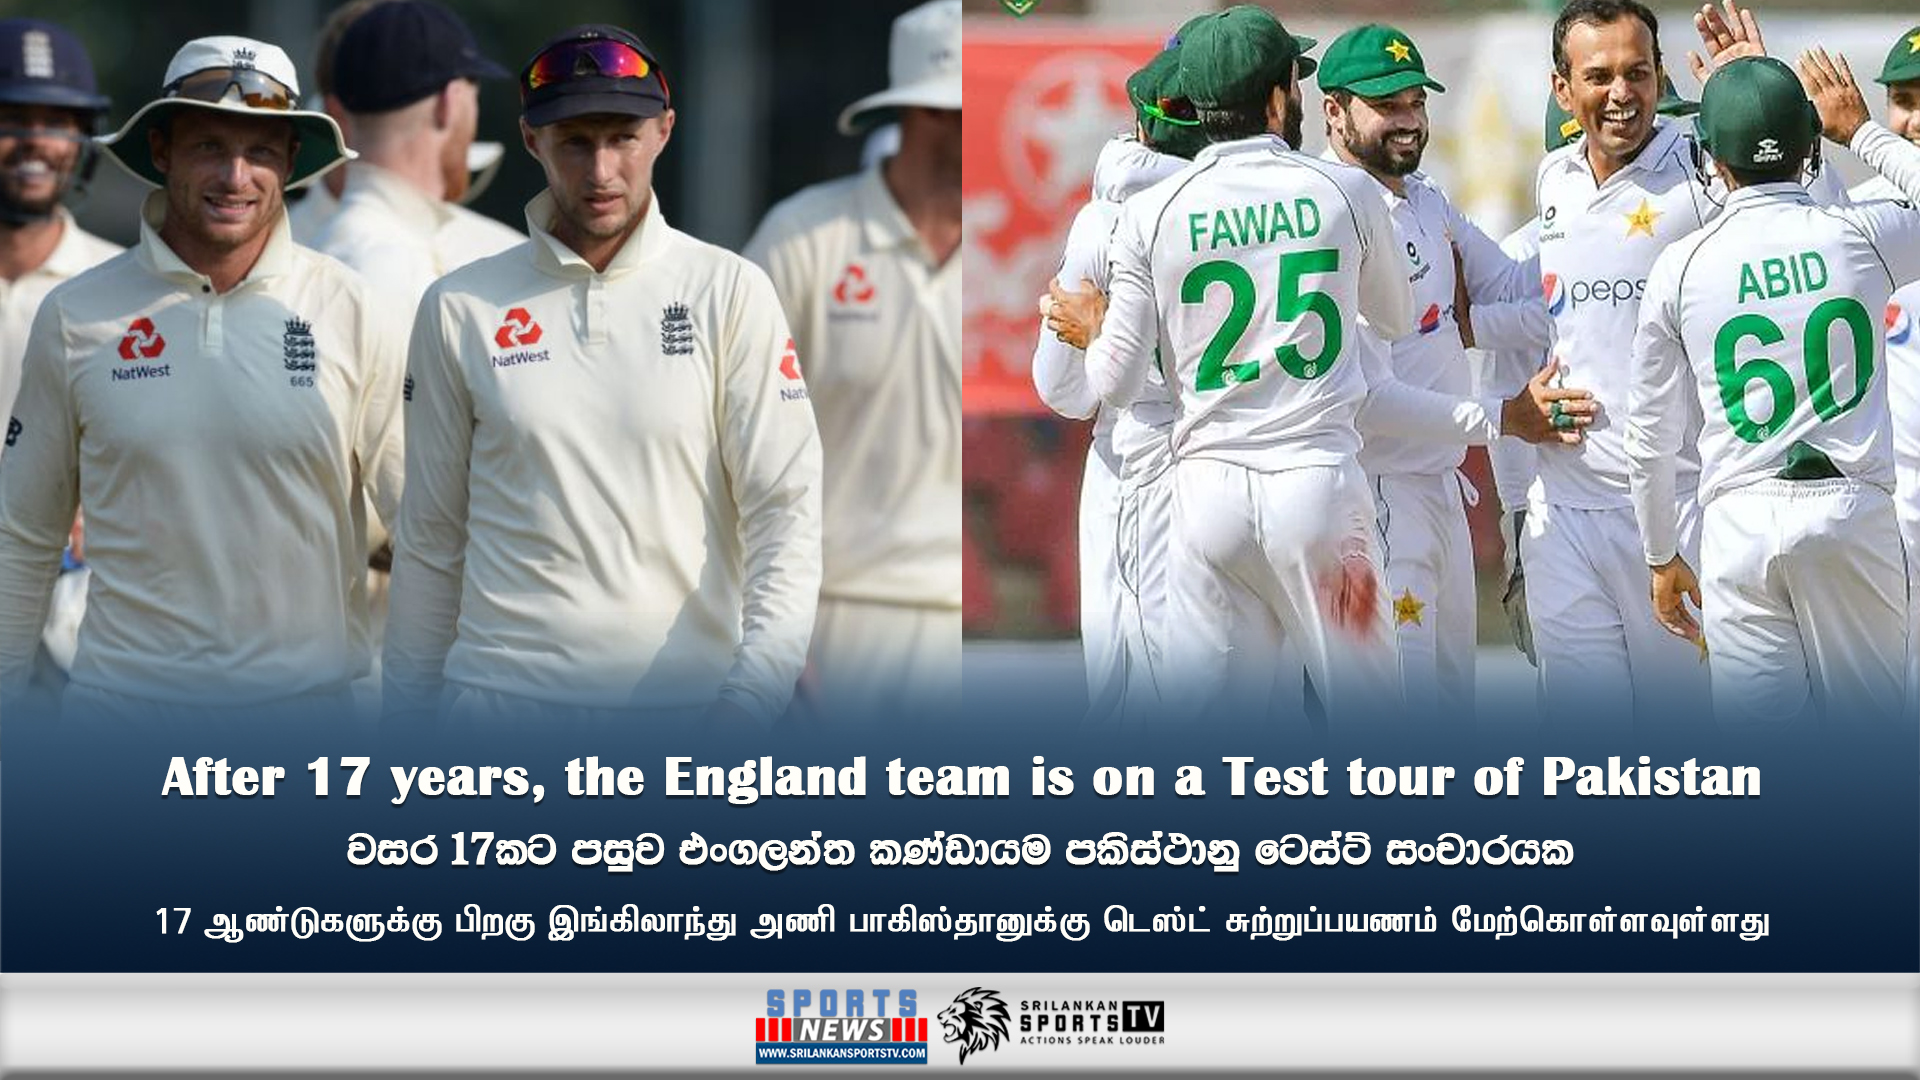 After 17 years, the England team is on a Test tour of Pakistan